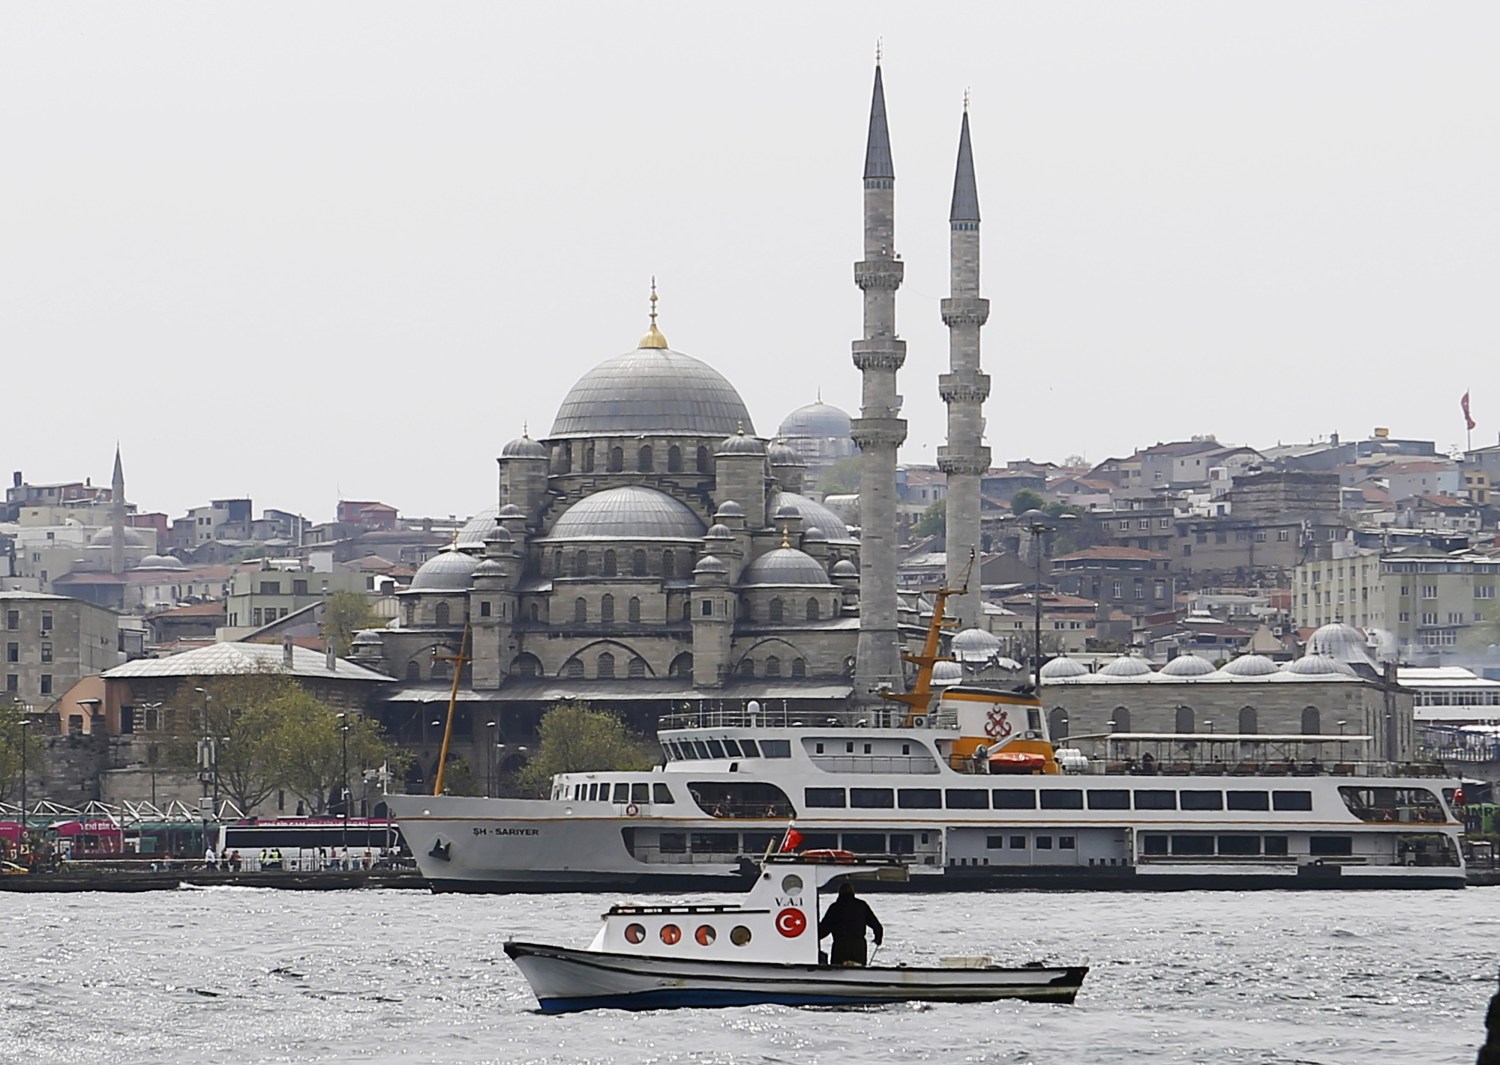 A fishing boat sails in the Golden Horn.